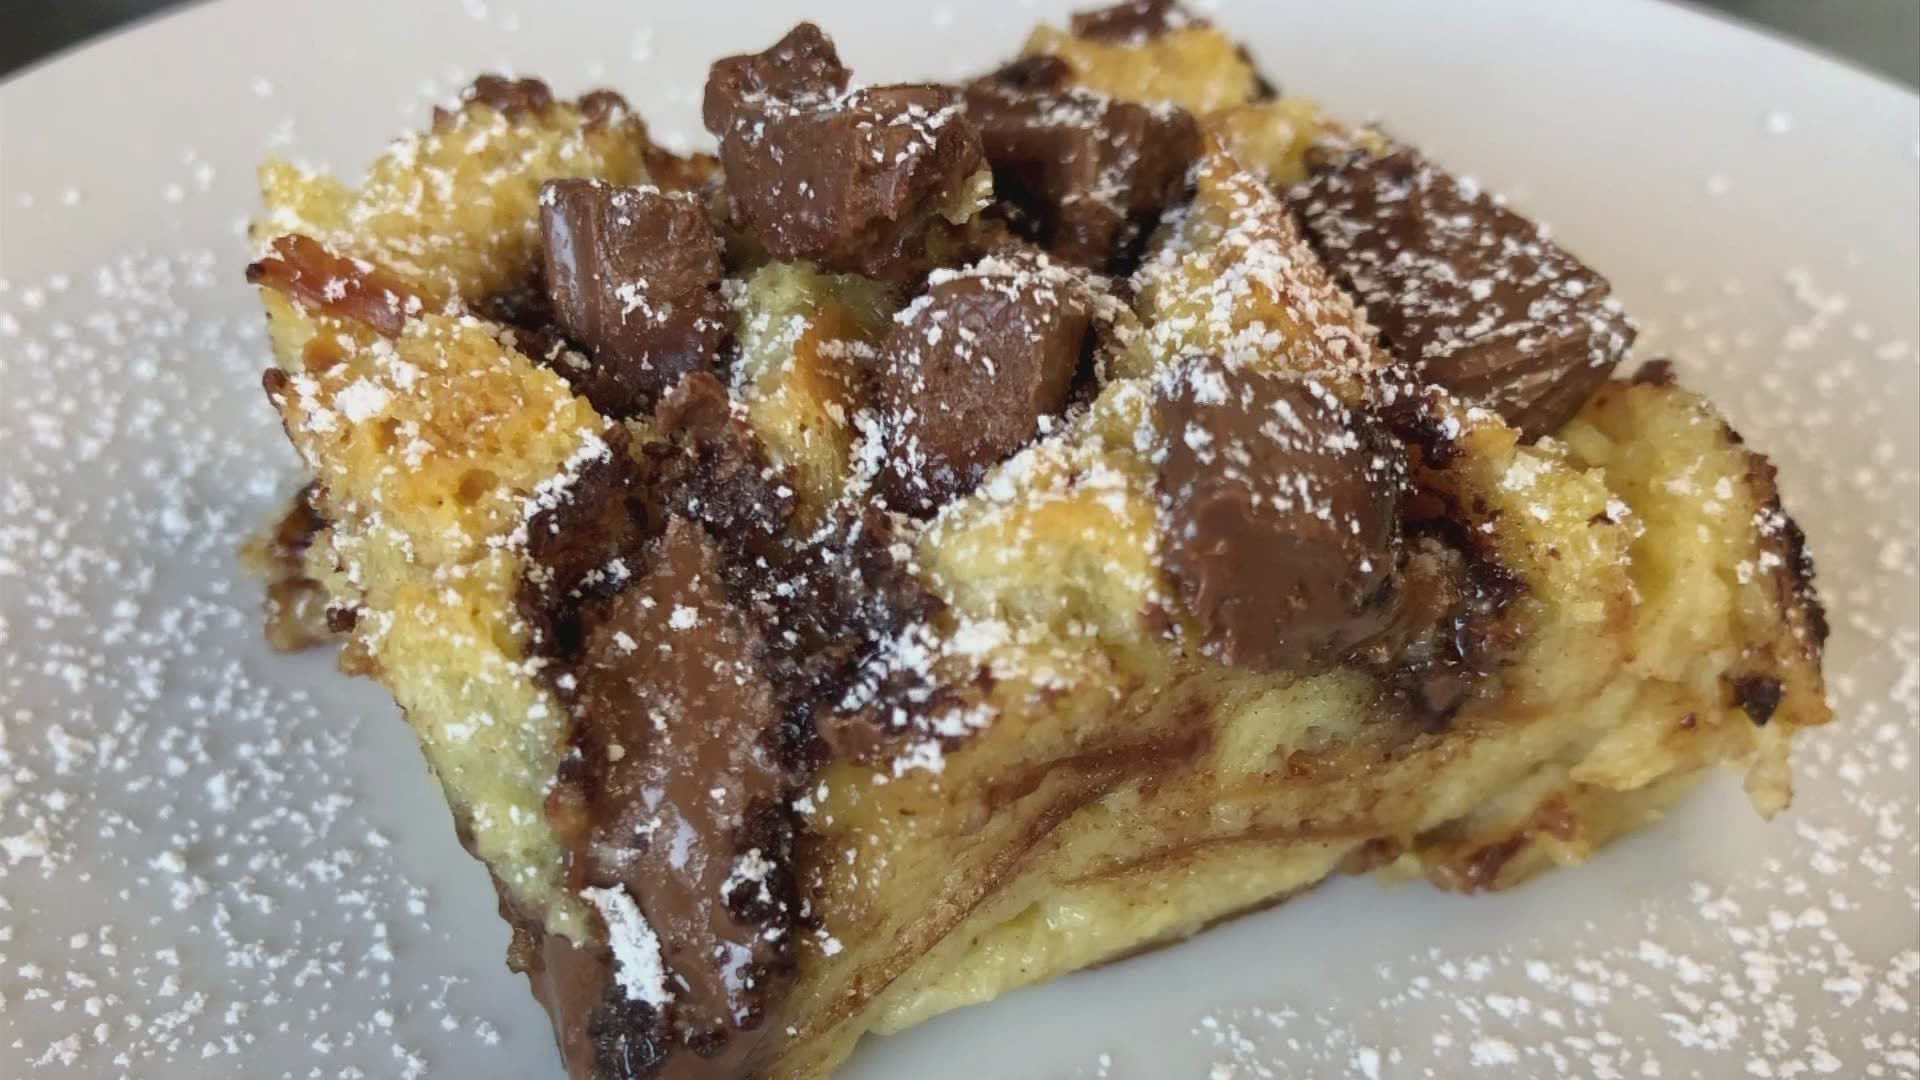 Brittany makes delicious chocolate chunk bread pudding using a recipe submitted by a viewer.